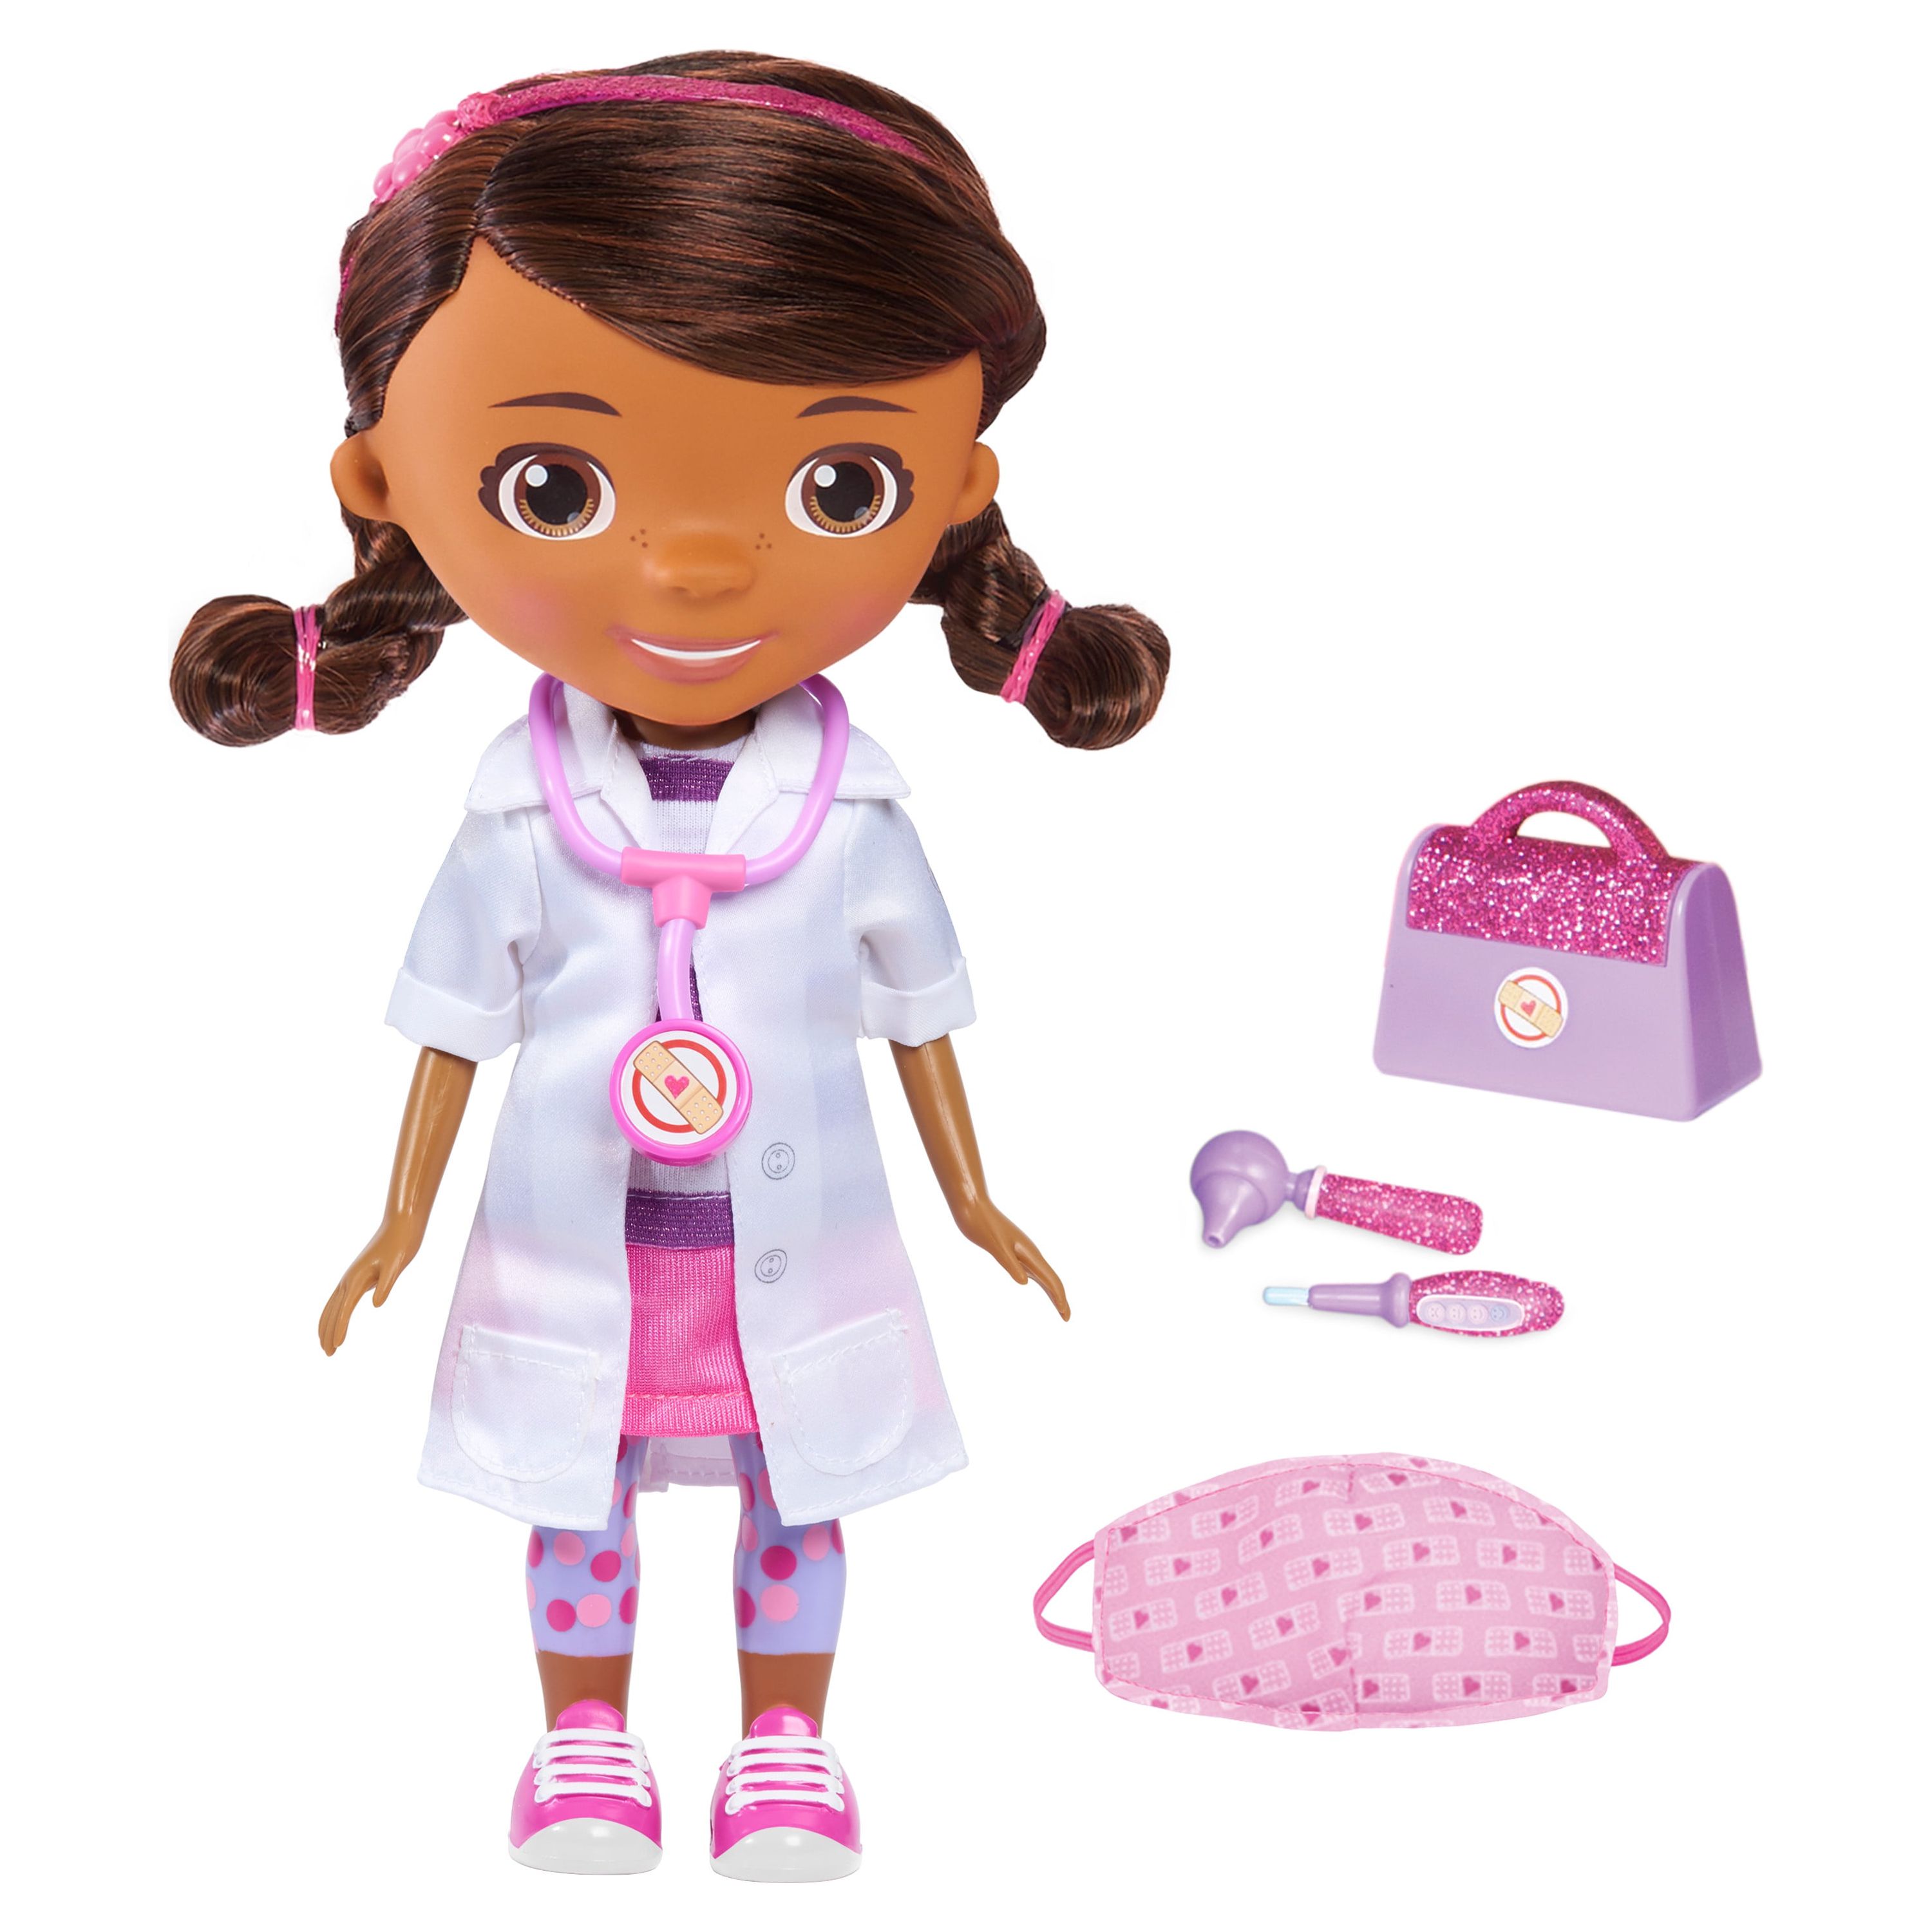 Disney Junior Doc McStuffins Wash Your Hands Singing Doll, With Mask & Accessories, Officially Licensed Kids Toys for Ages 3 Up, Gifts and Presents - image 4 of 5